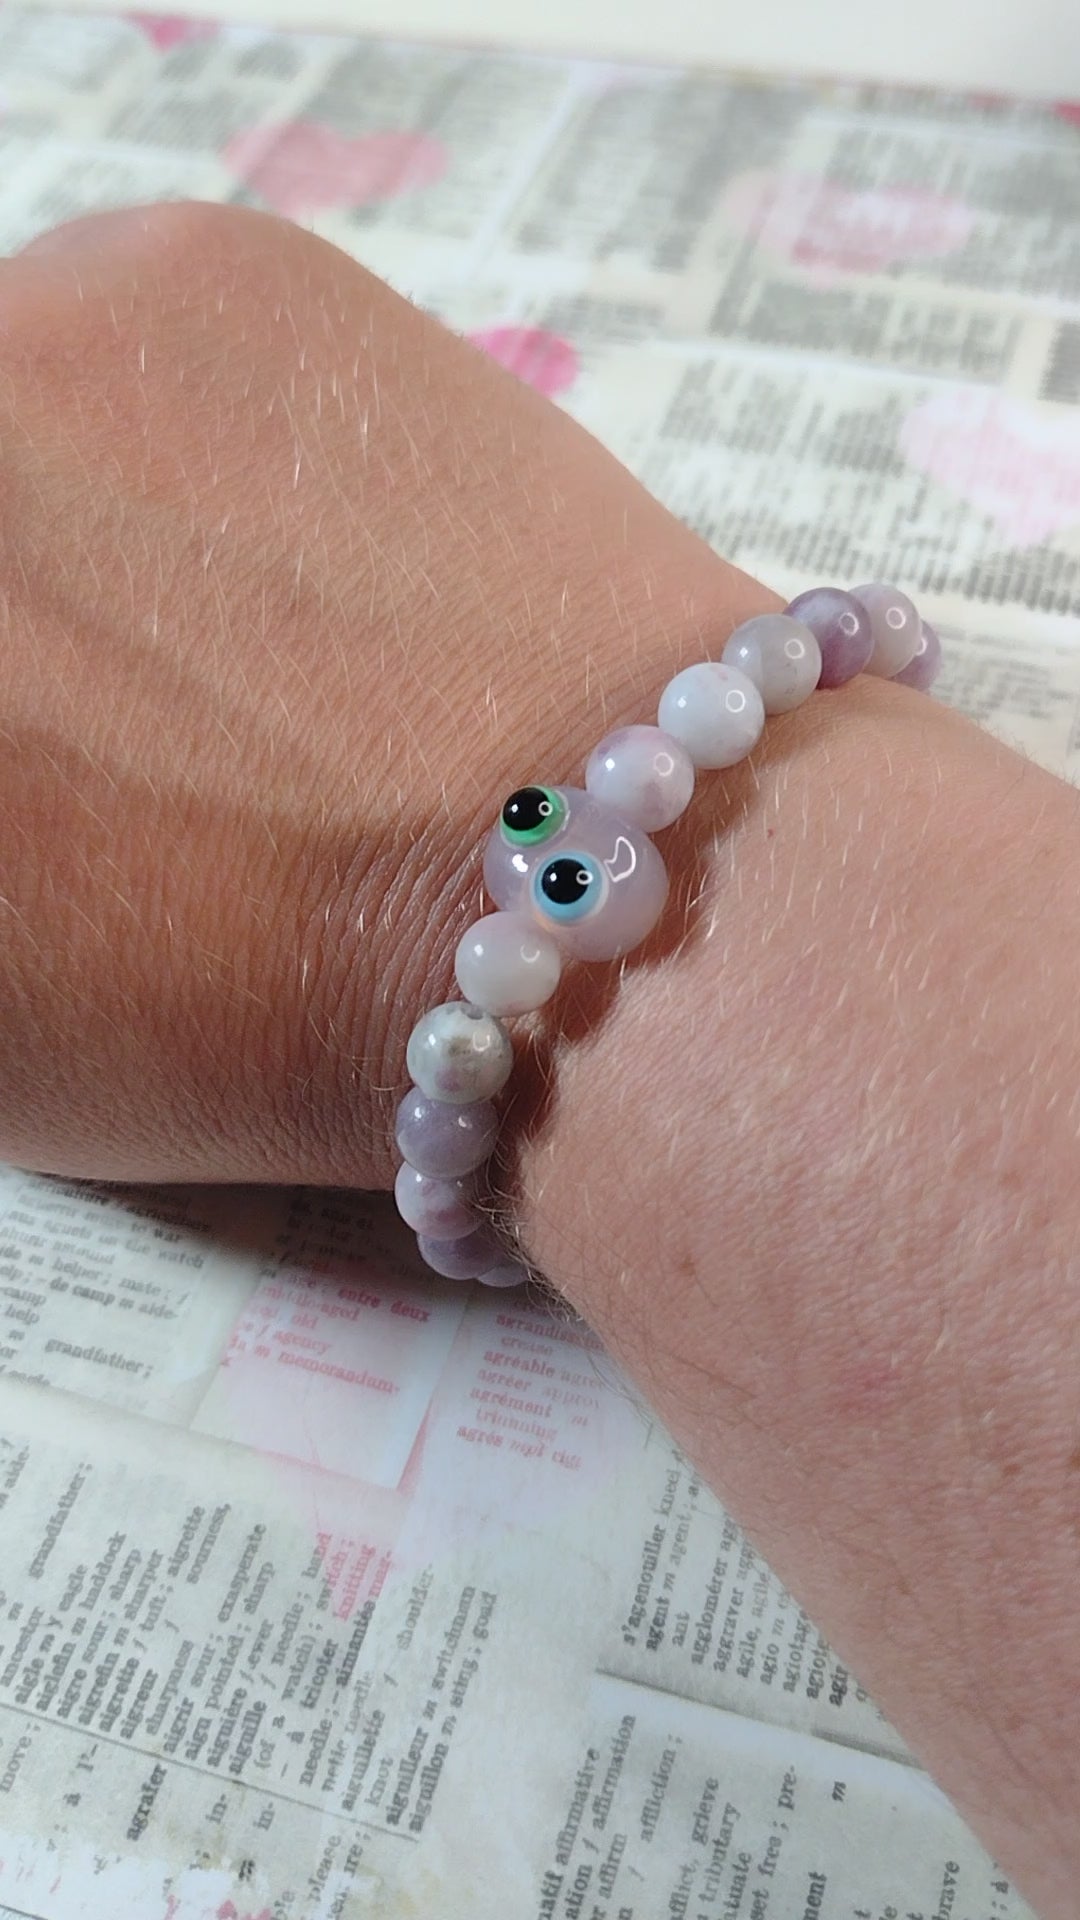 video of a lepidolite buddy bead bracelet being worn to show scale